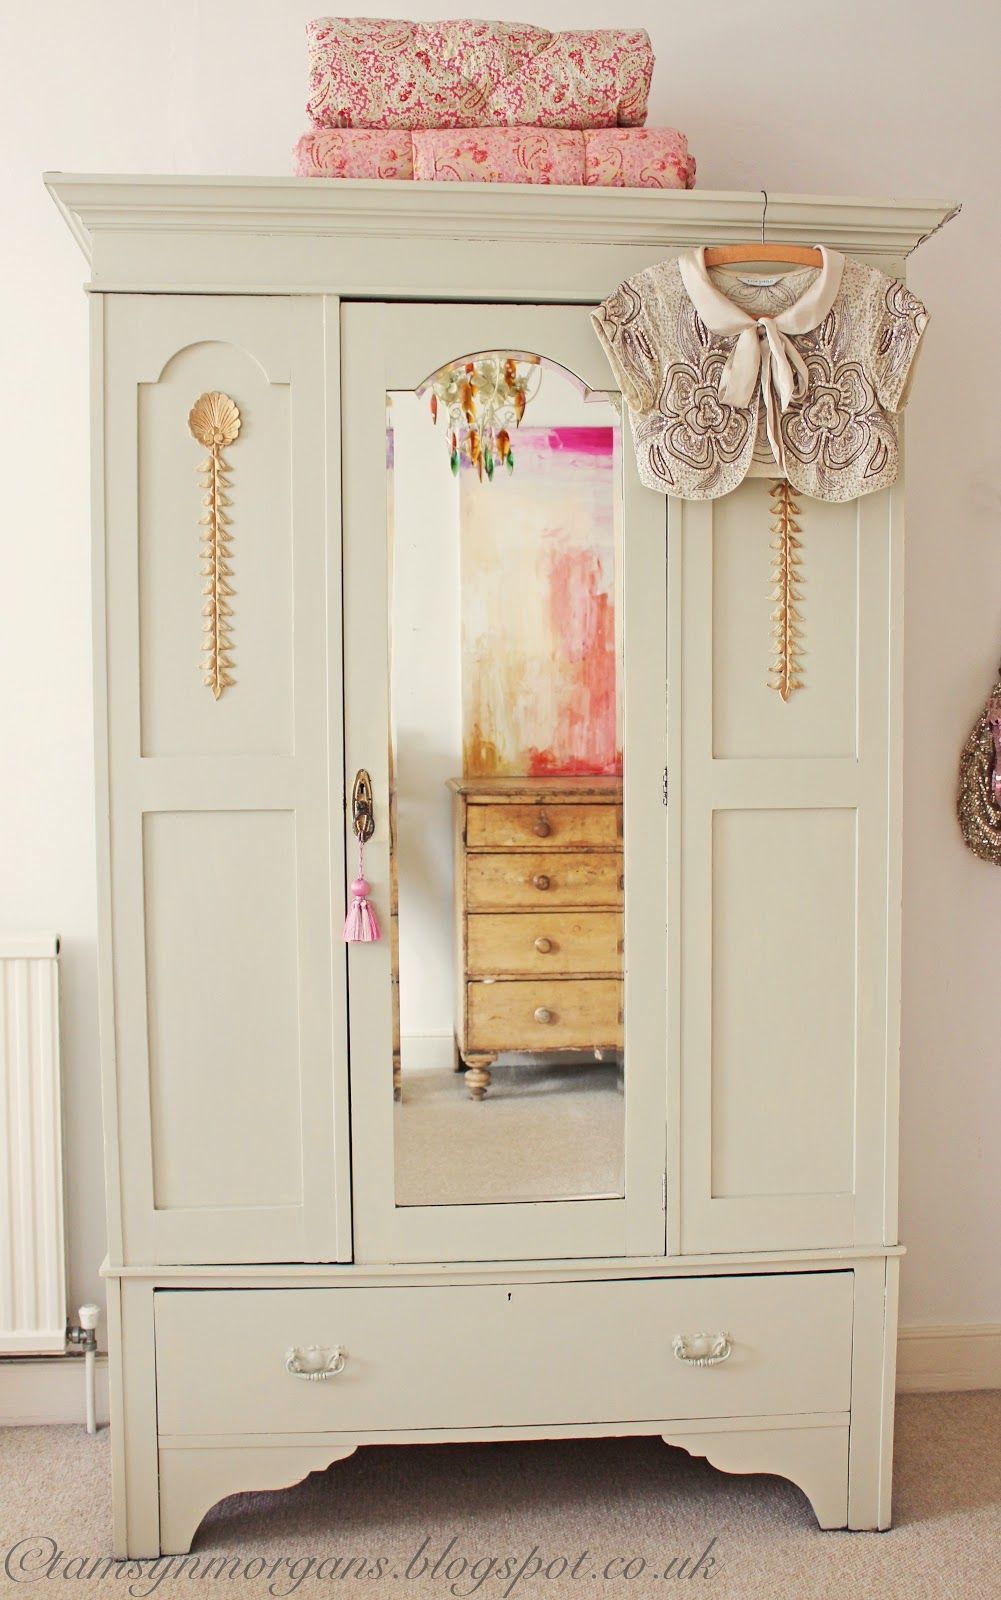 The Villa On Mount Pleasant: My Shabby Chic Wardrobe | Shabby Chic  Wardrobe, Shabby Chic Room, Shabby Chic Decor Bedroom Pertaining To Cheap Shabby Chic Wardrobes (View 3 of 15)